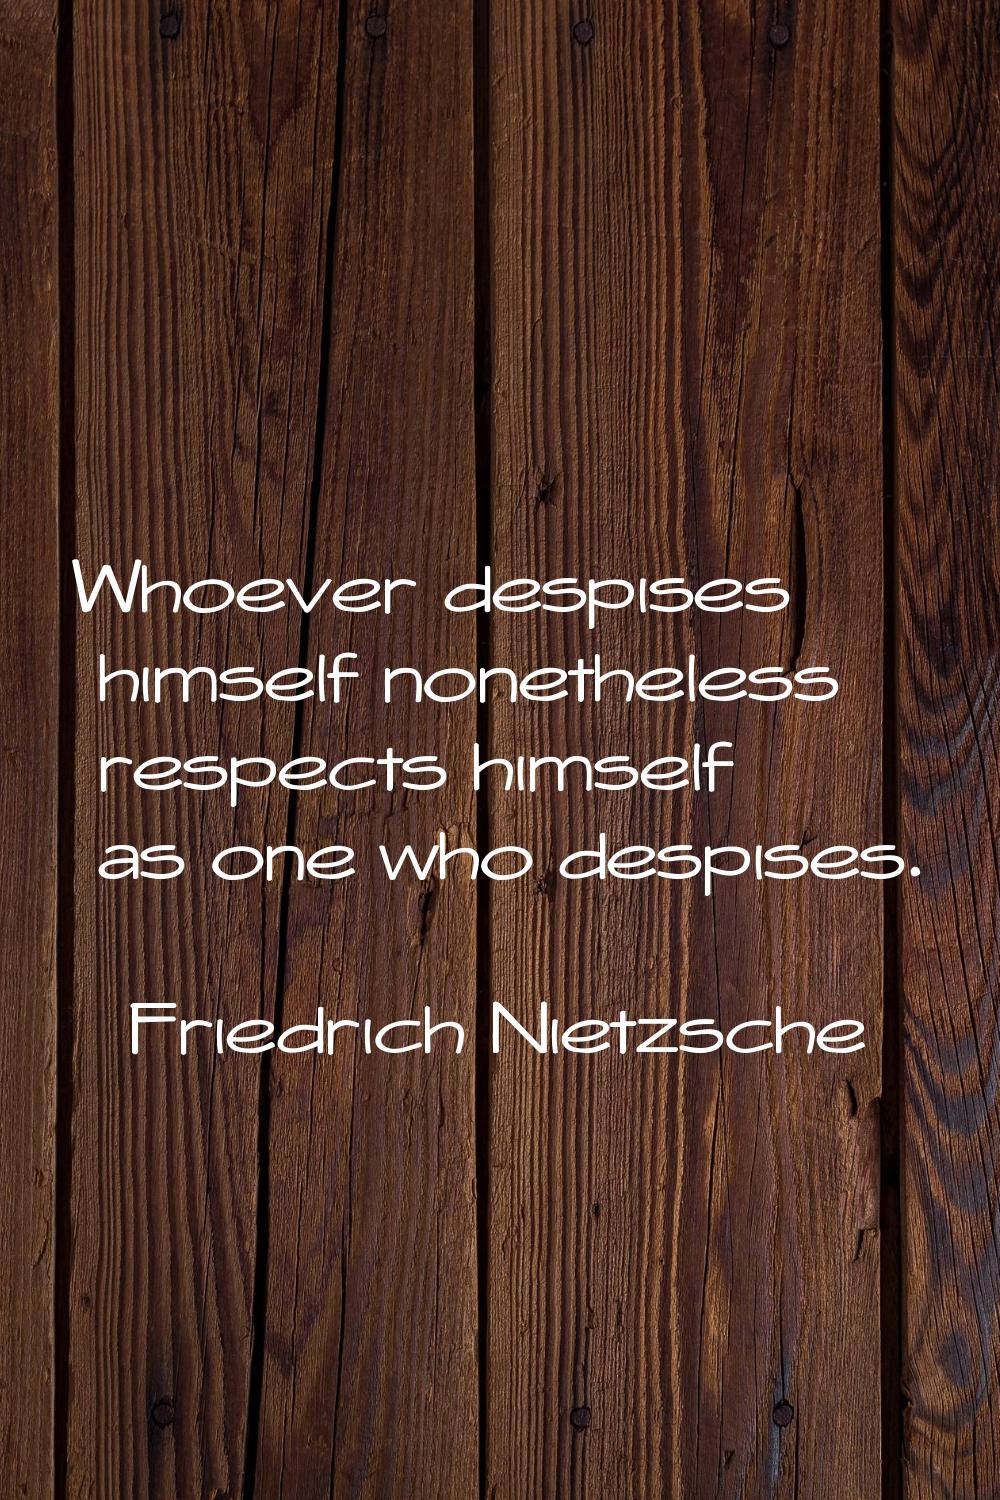 Whoever despises himself nonetheless respects himself as one who despises.